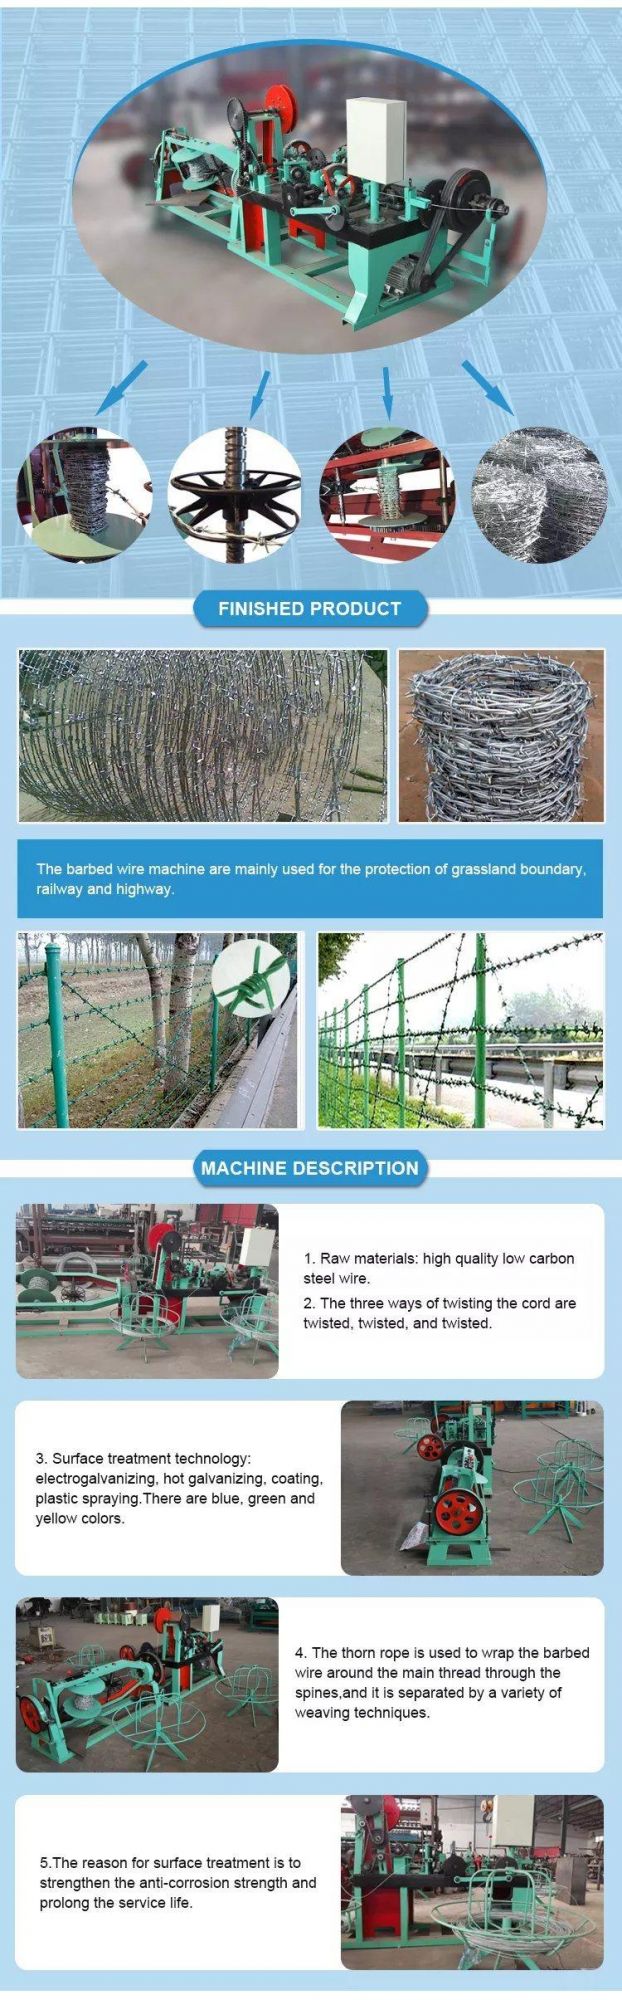 Single Wire of CS-B Type Barbed Wire Machine